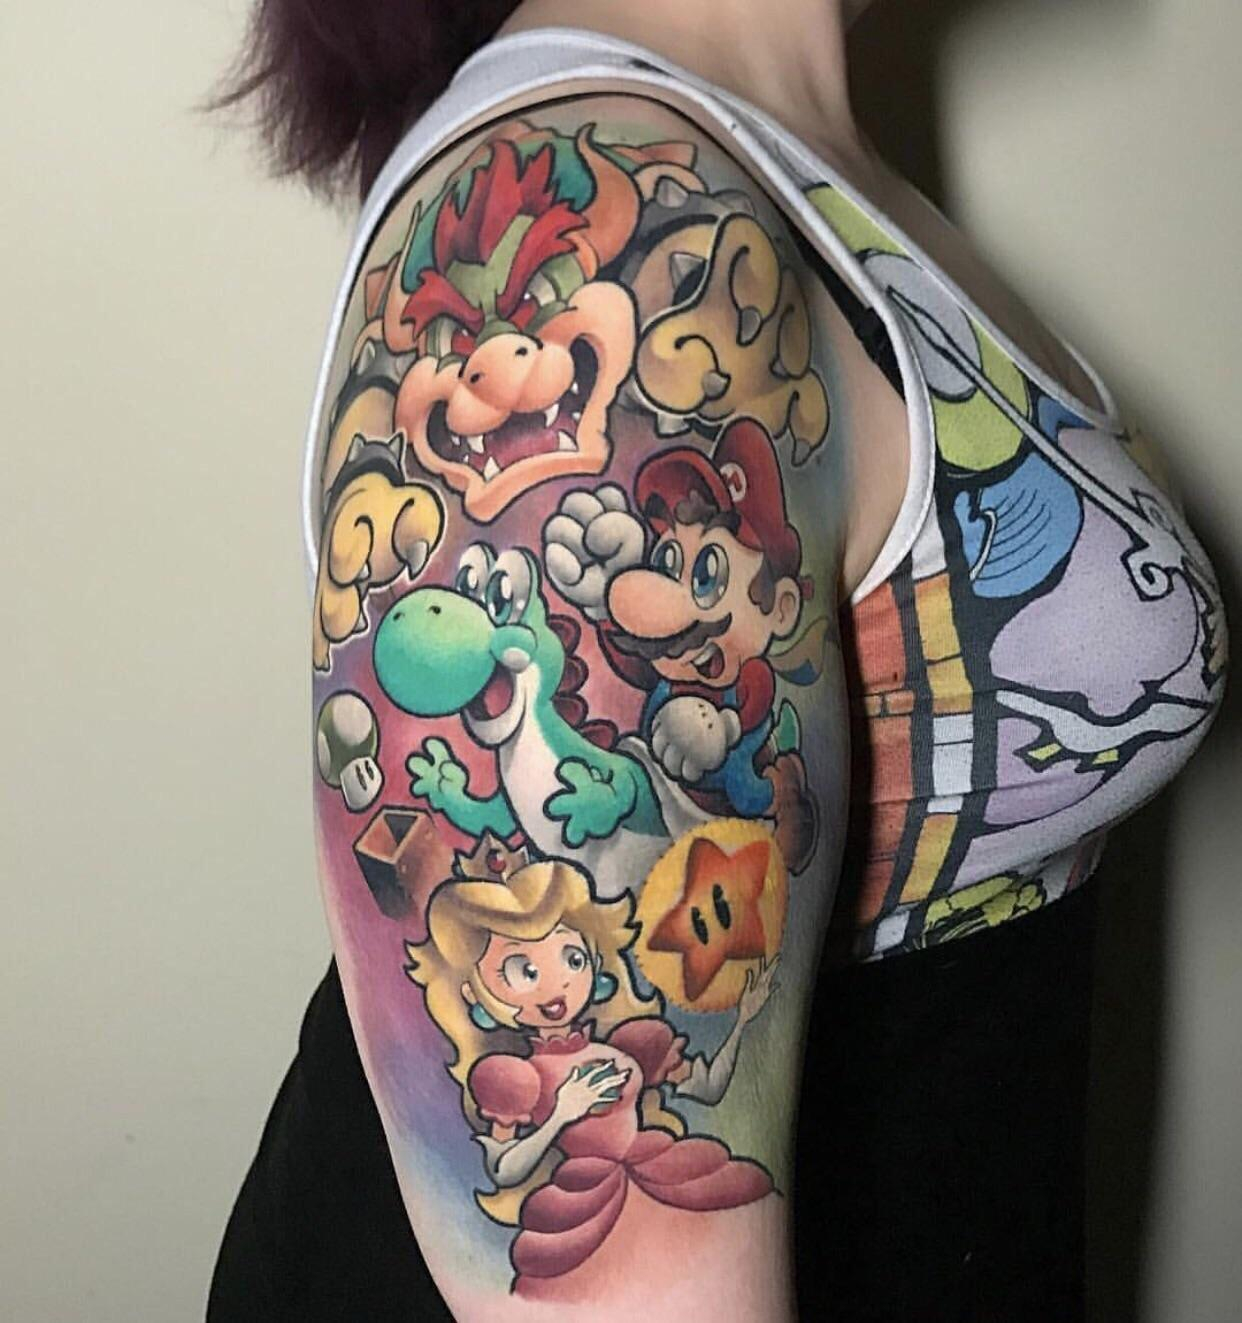 Super Mario Sleeve Tattoo Atbge intended for dimensions 1242 X 1323